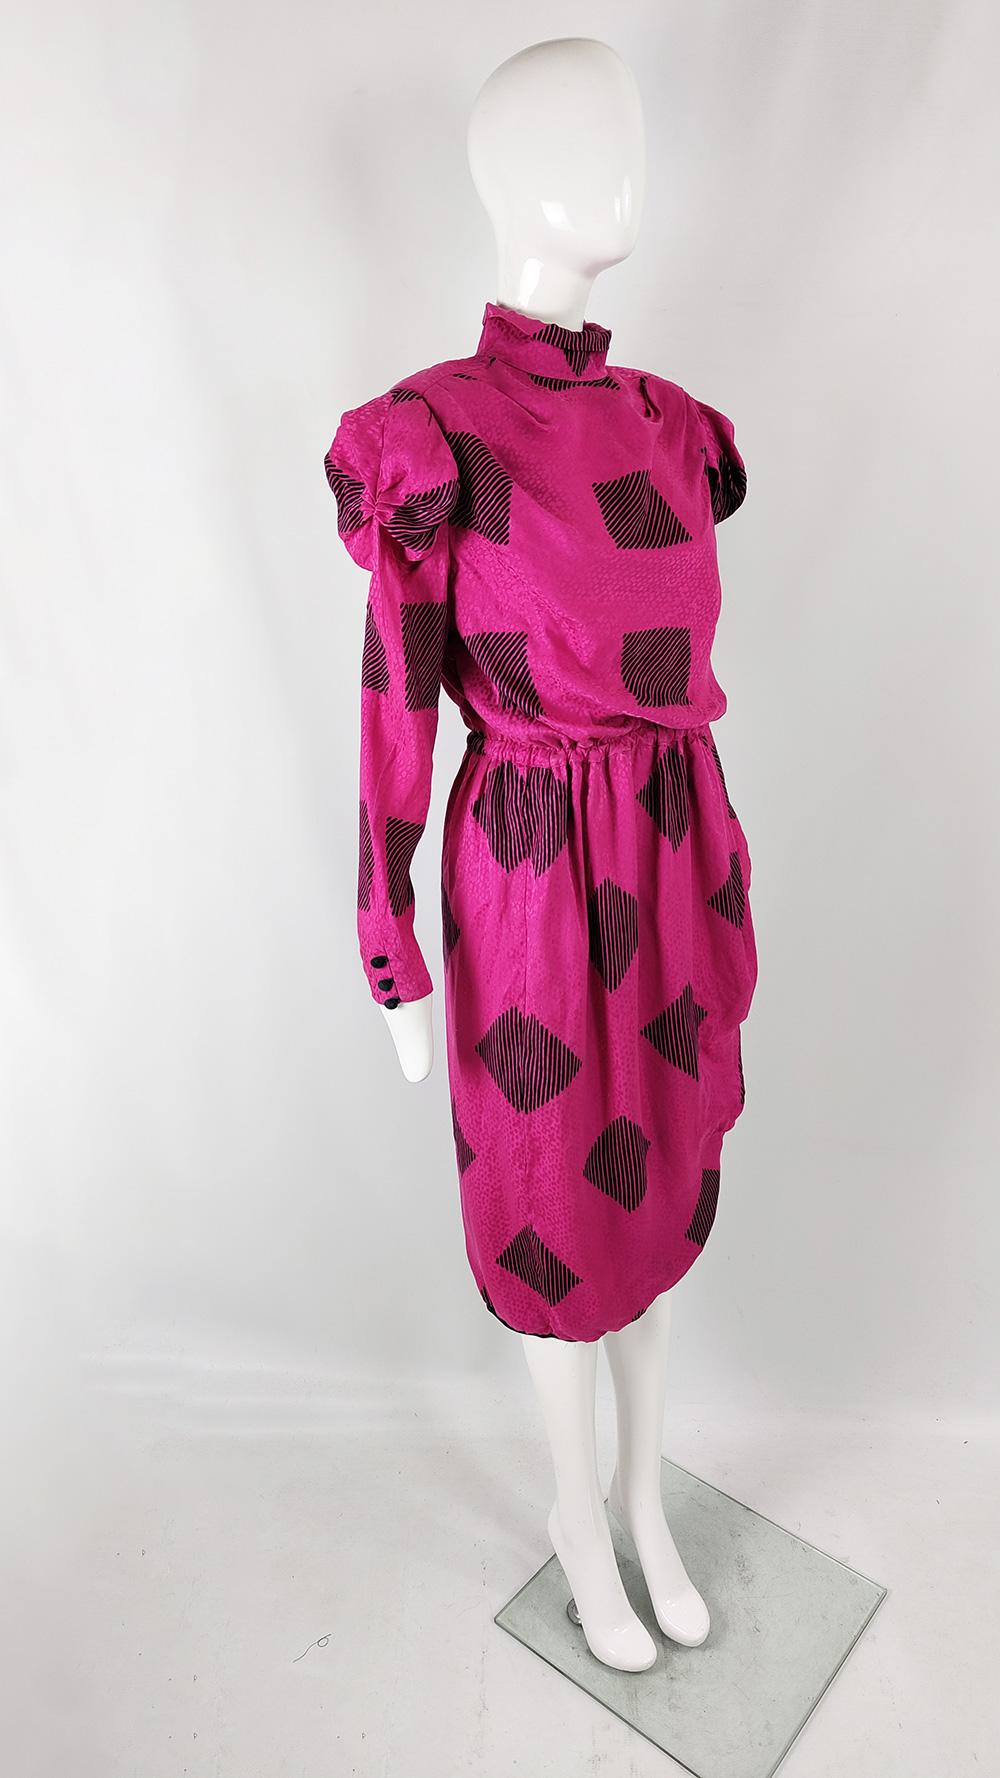 Robina Paris 80s Vintage Fuchsia Silk Architectural Sleeve Evening Dress, 1980s In Good Condition For Sale In Doncaster, South Yorkshire